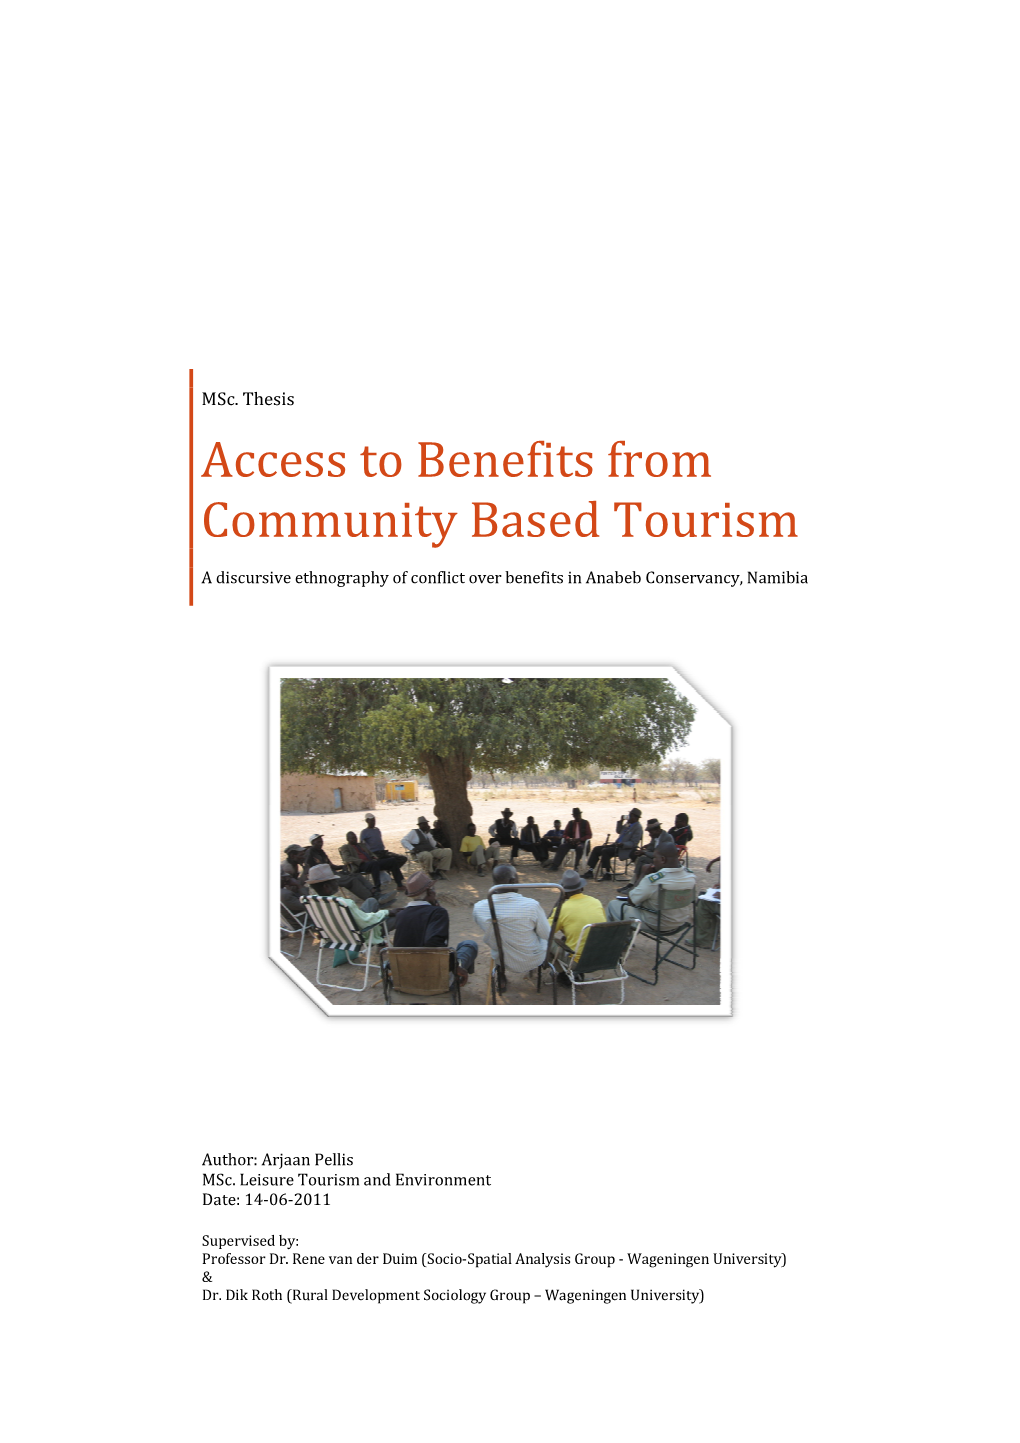 Access to Benefits from Community Based Tourism